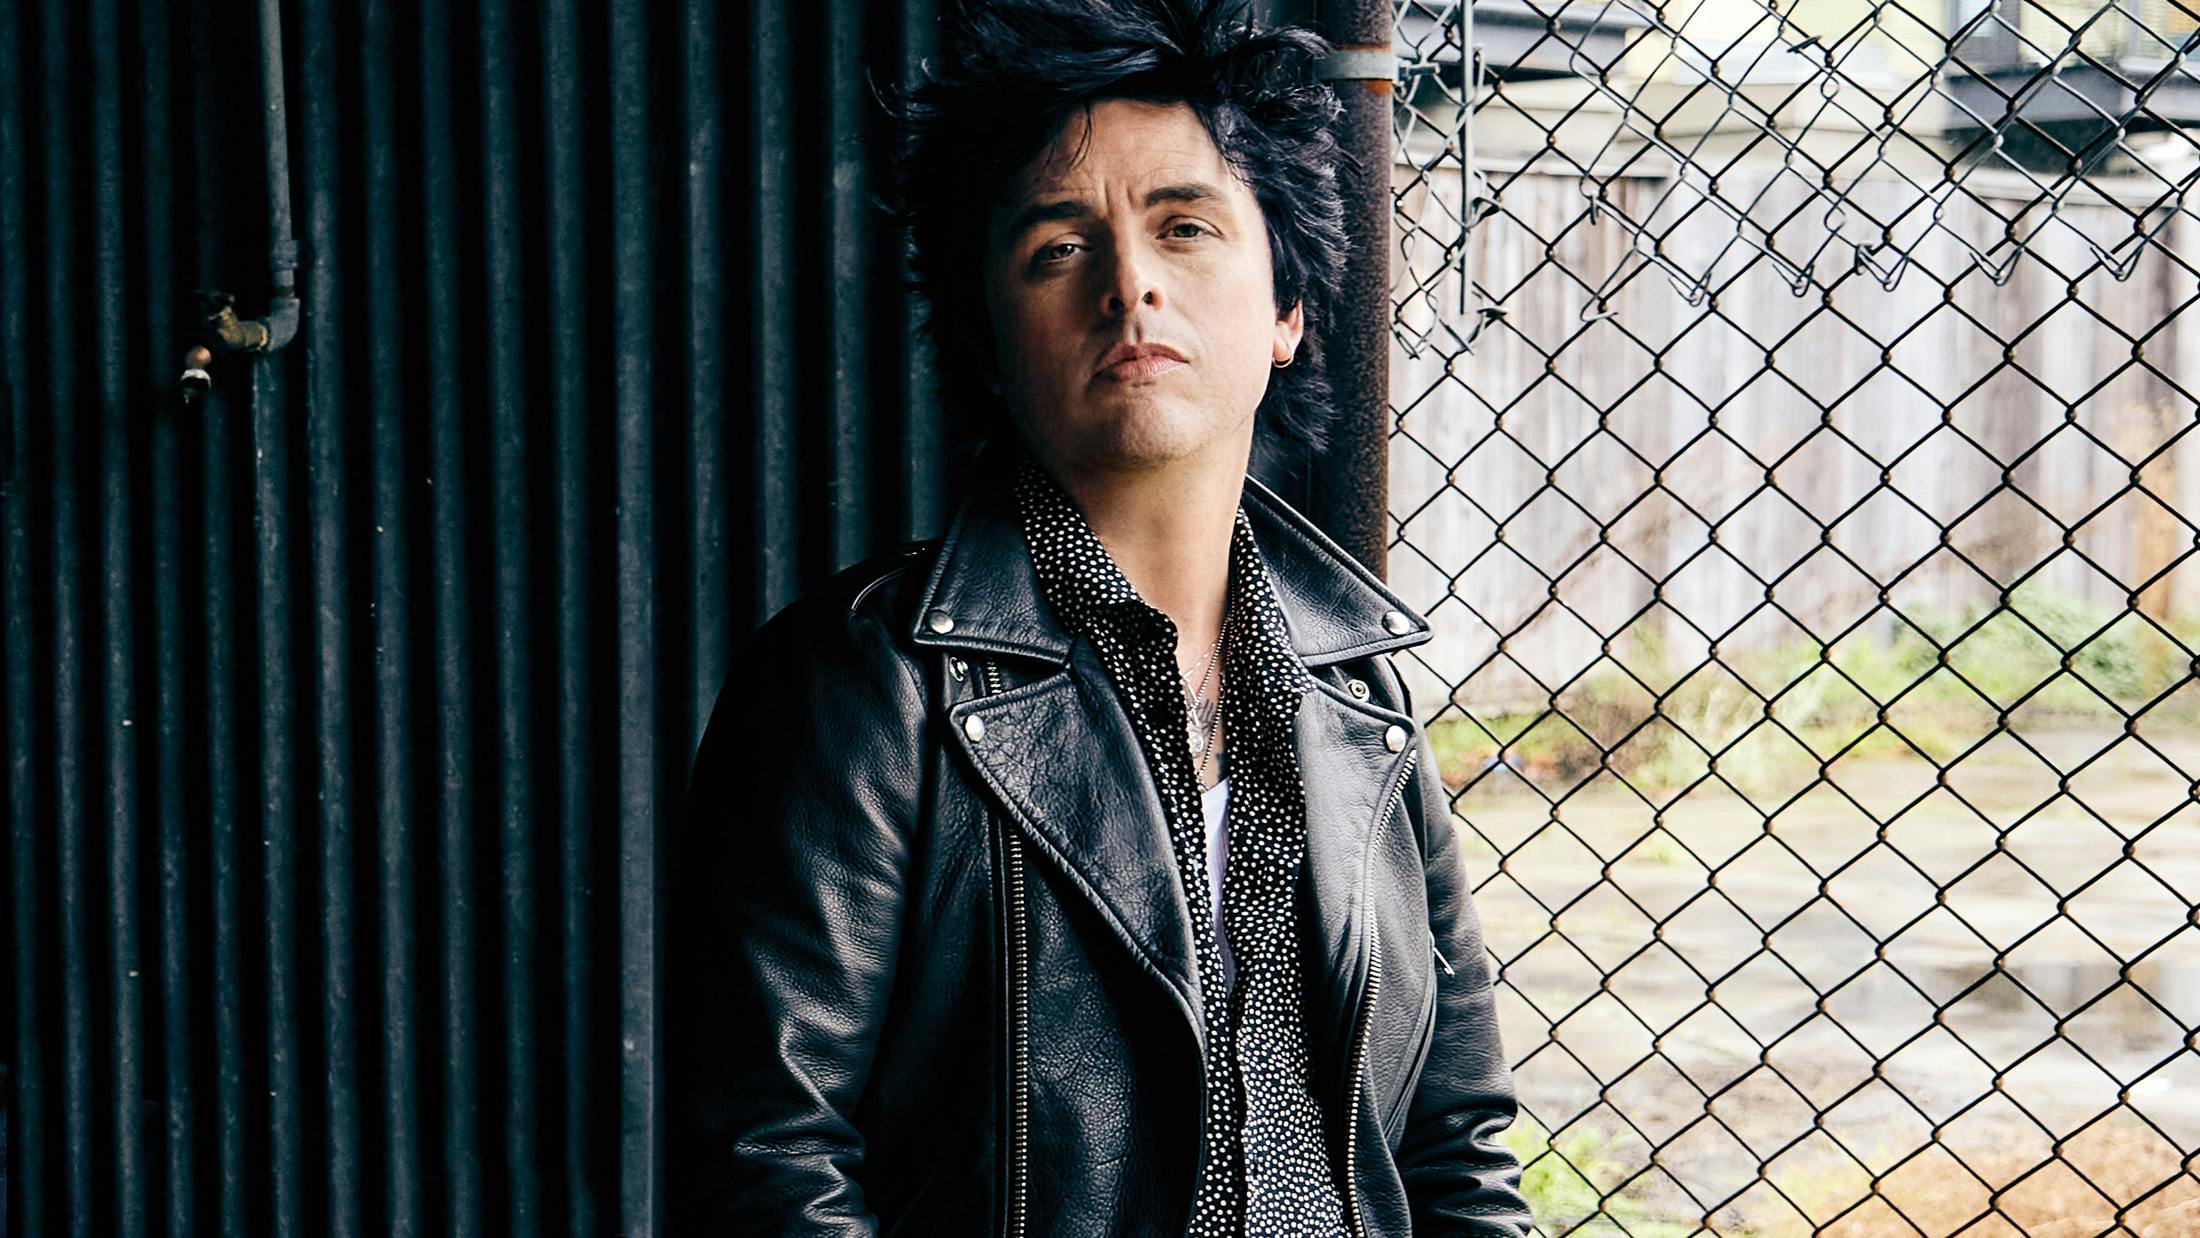 Green Day's Billie Joe Armstrong Has Covered Gimme Some Truth By John Lennon